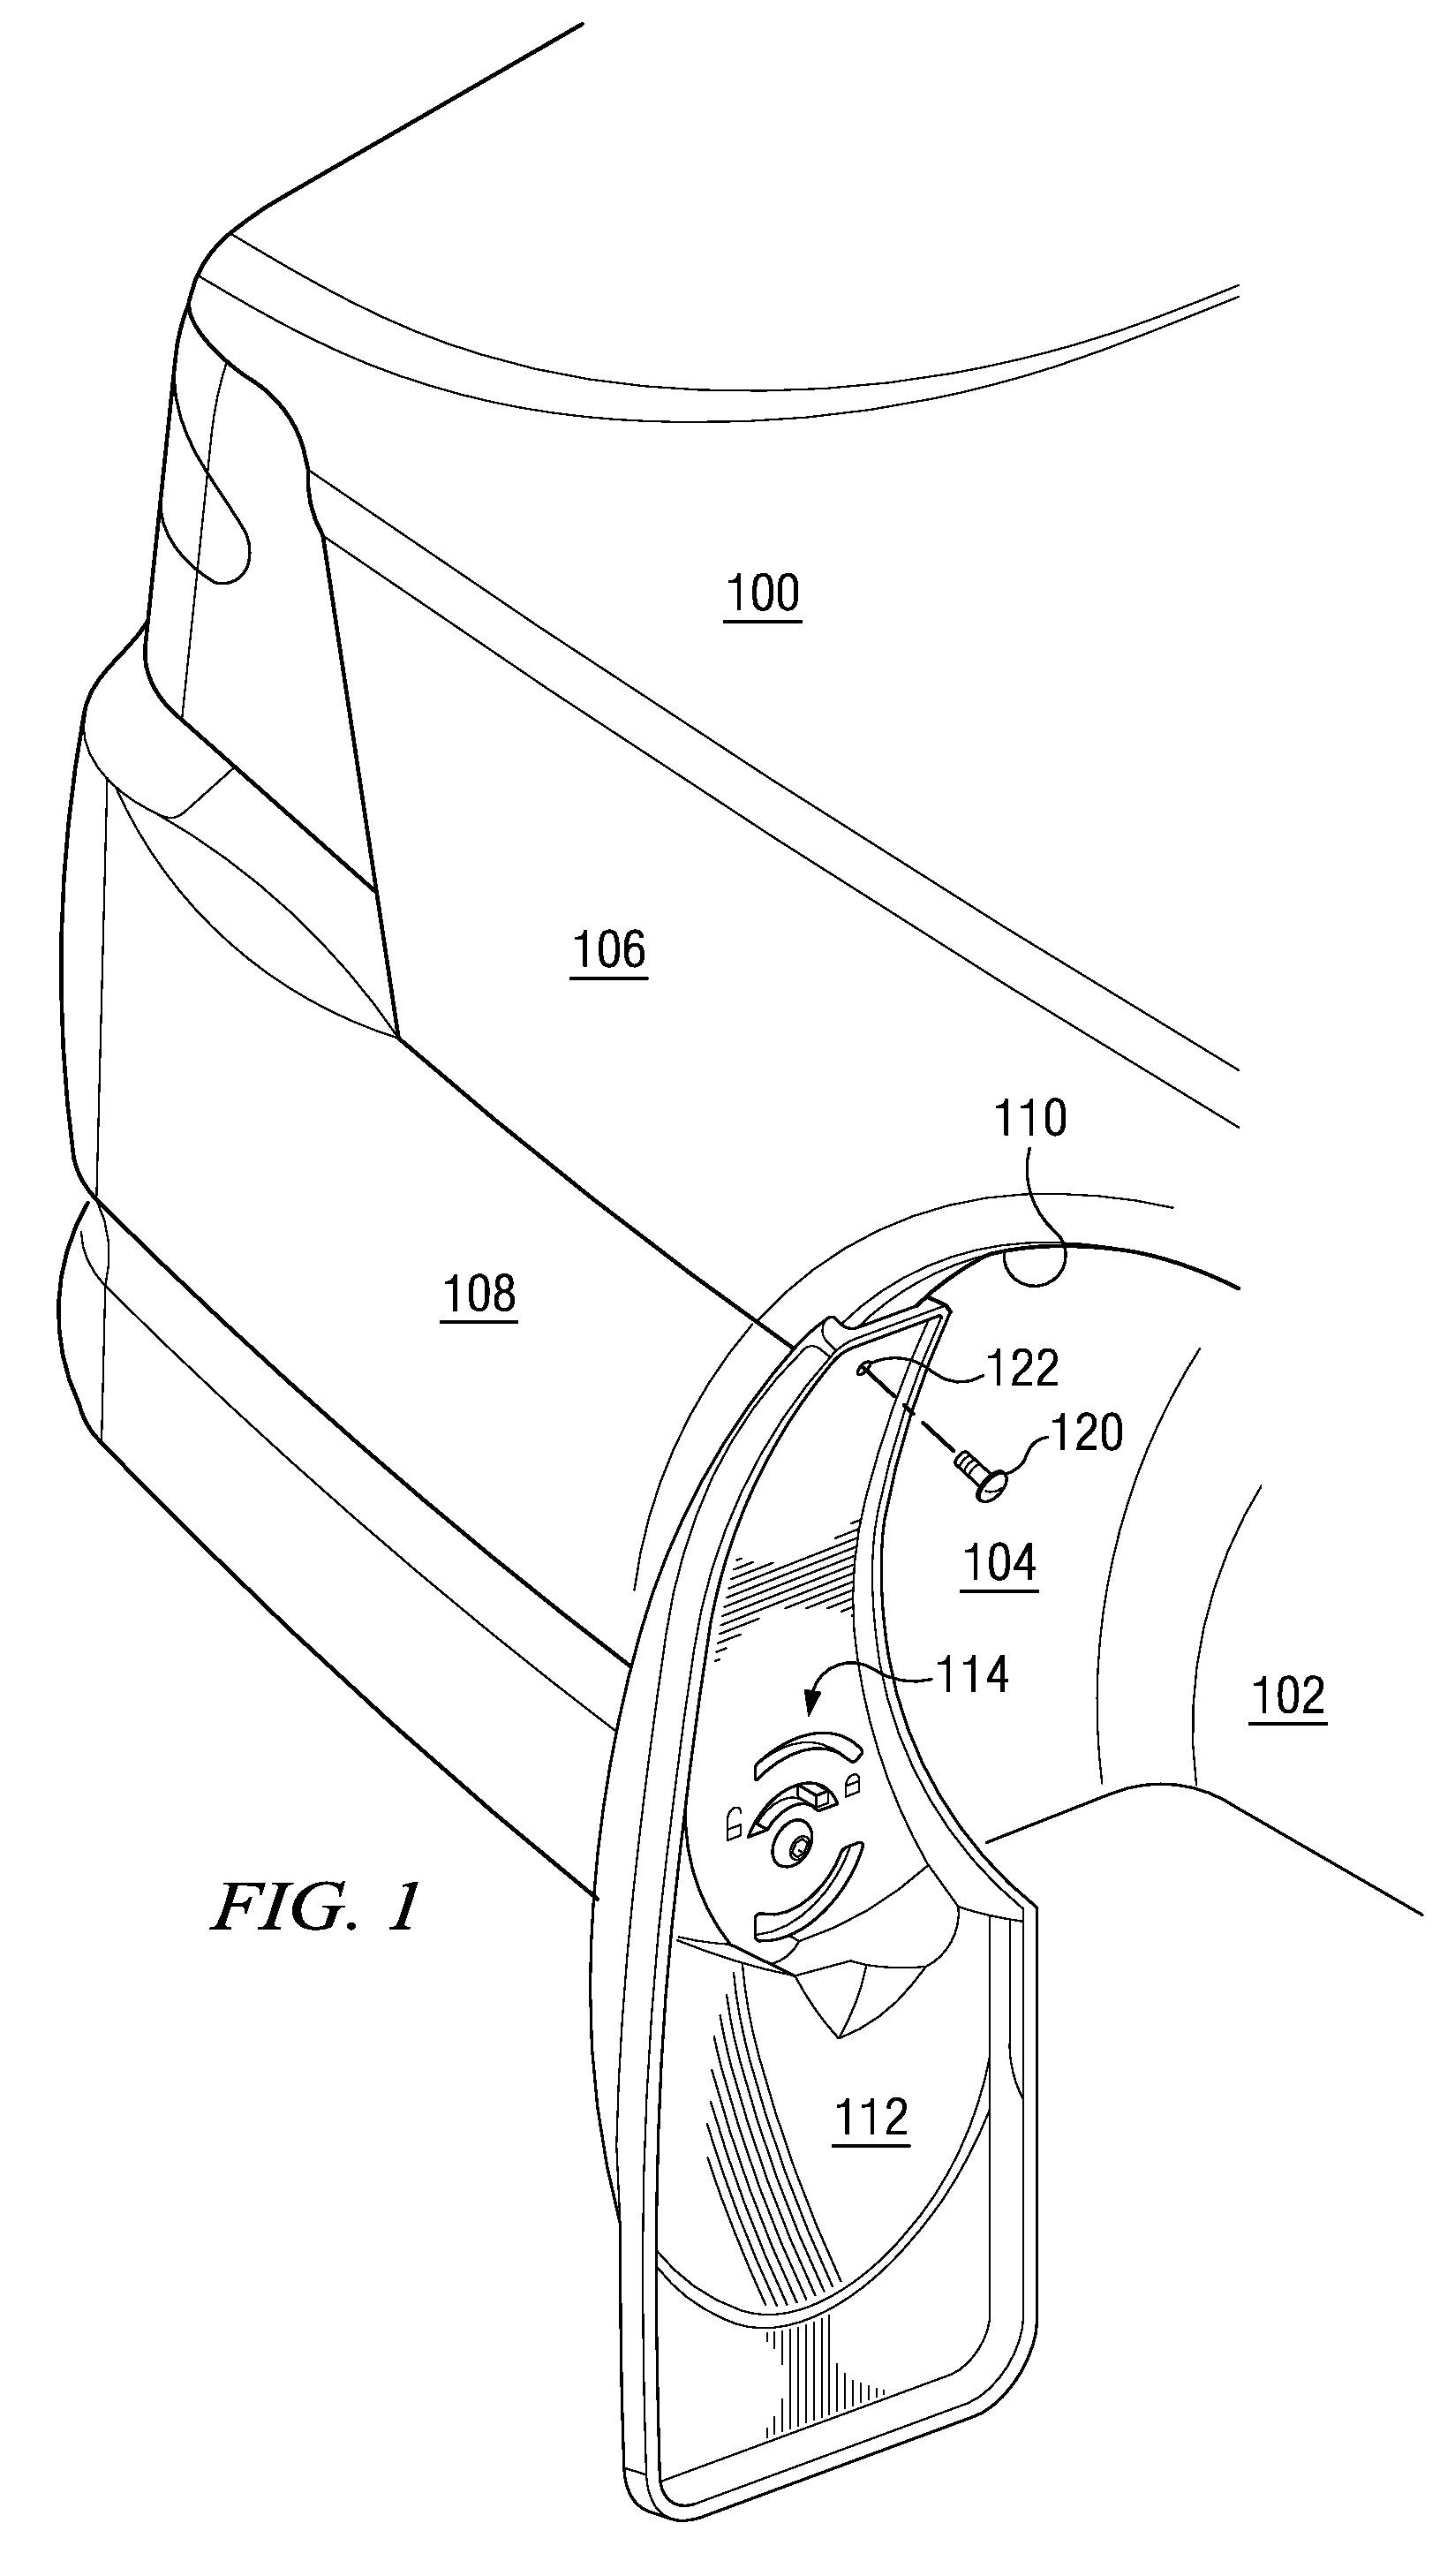 Vehicle mud flap with fender fold clamp